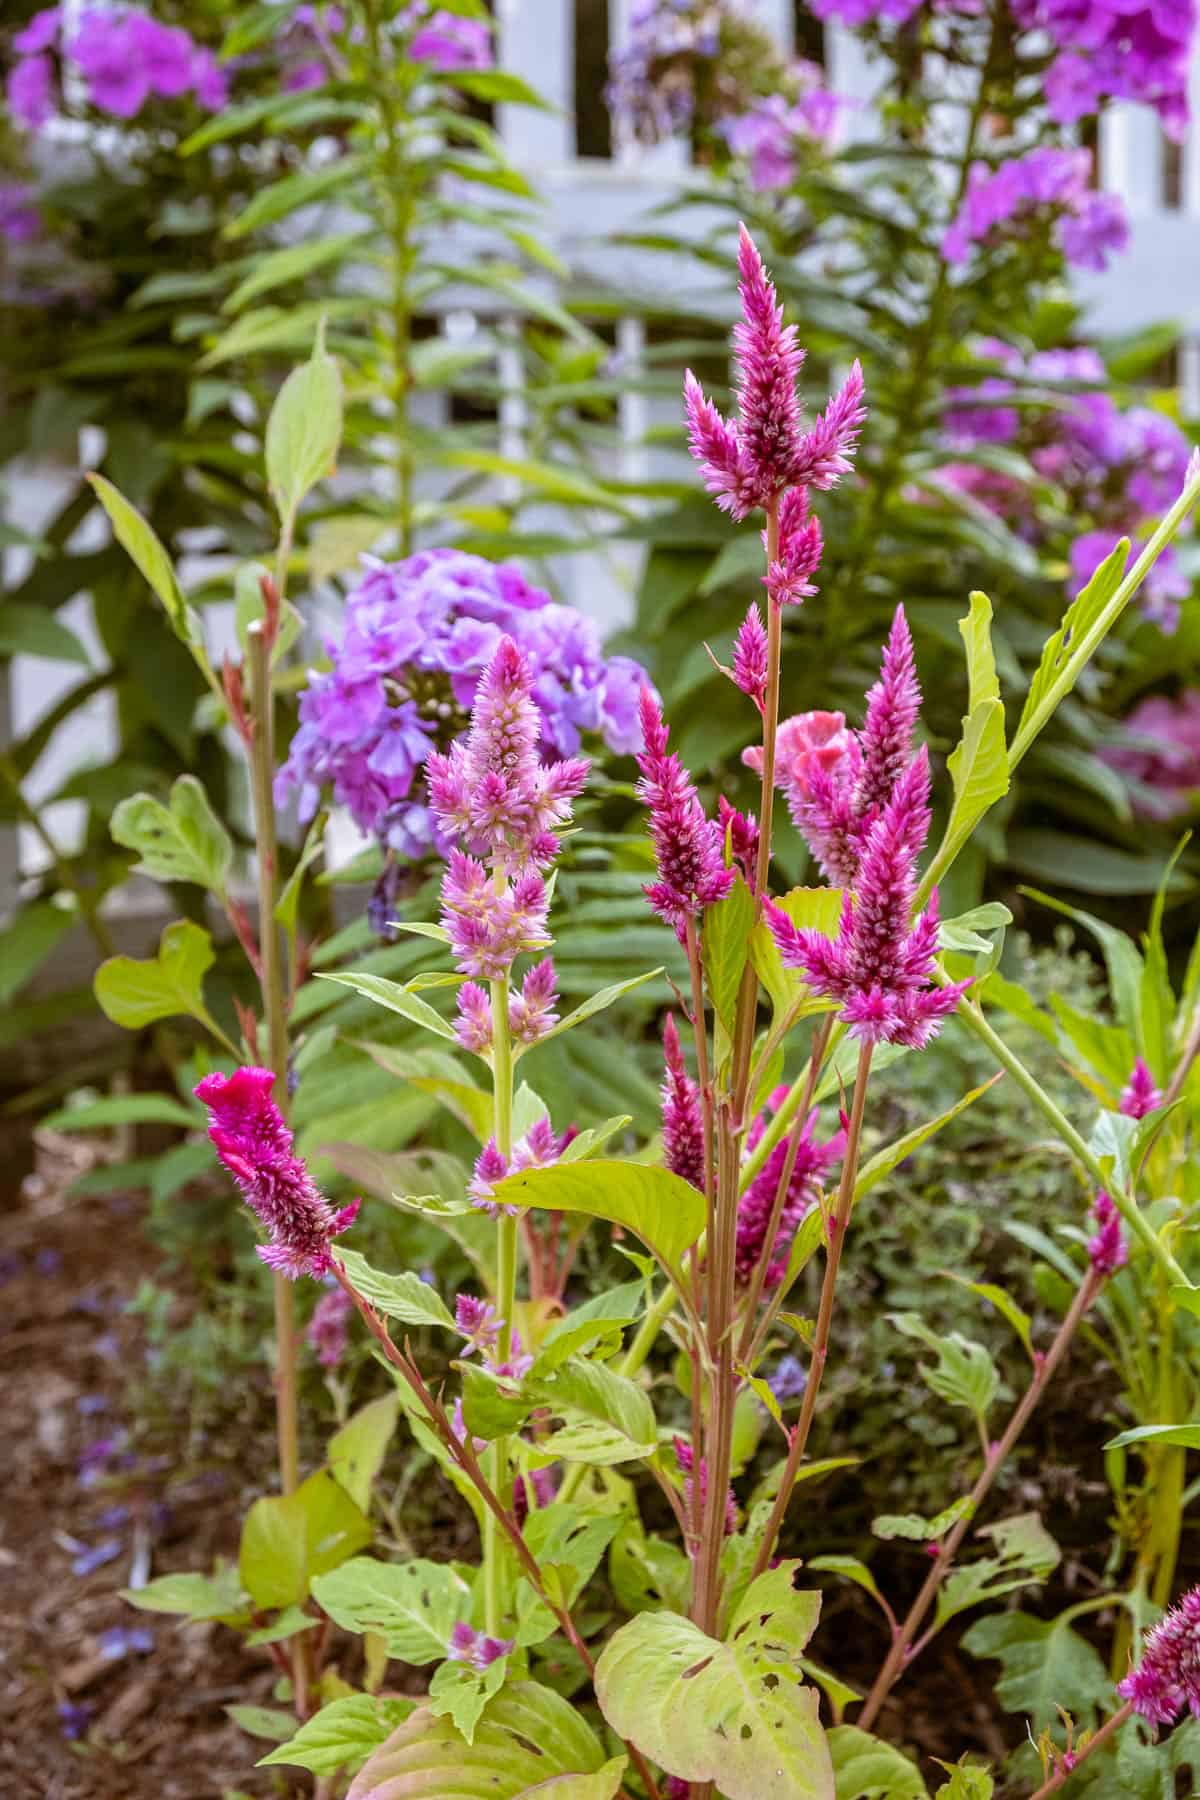 Wheat celosia spikes in a variety of hot pinks.